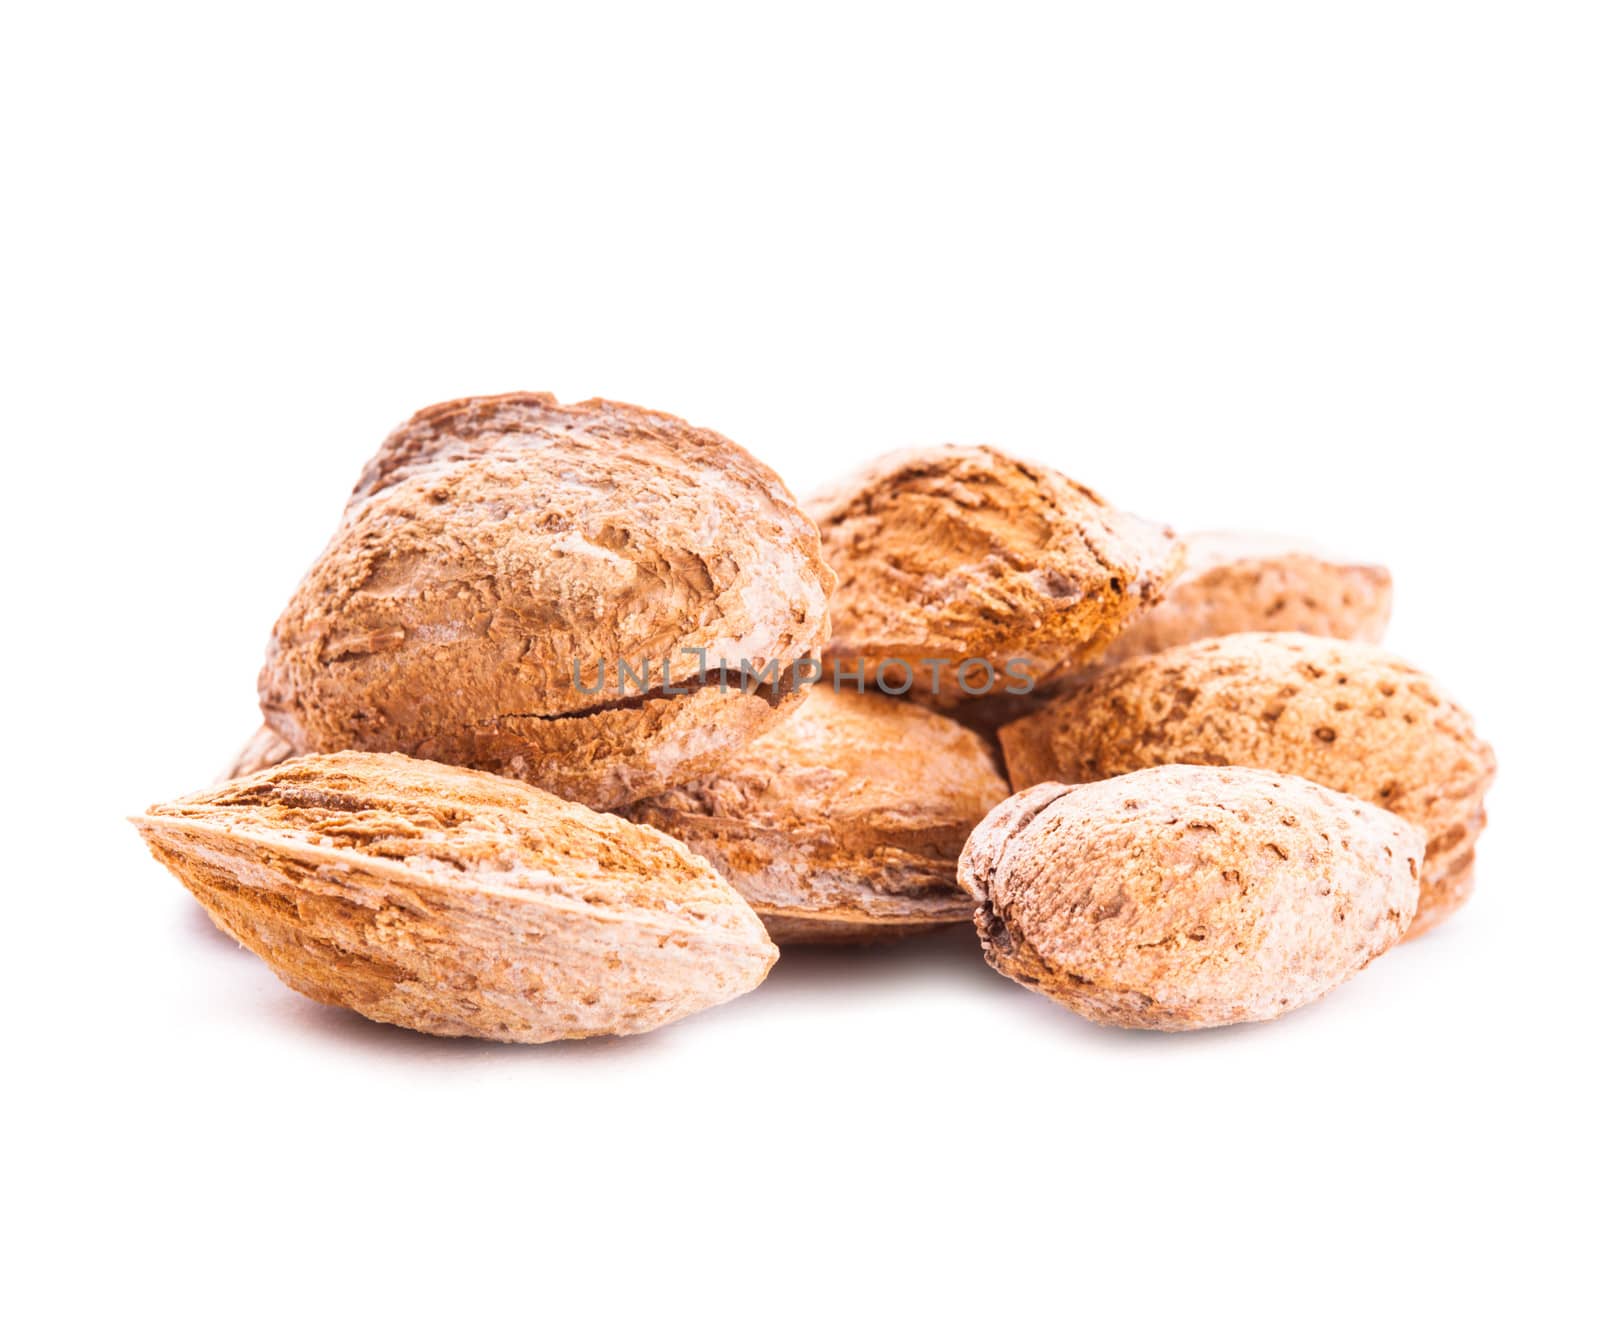 Unpeeled almond heap isolated on white background